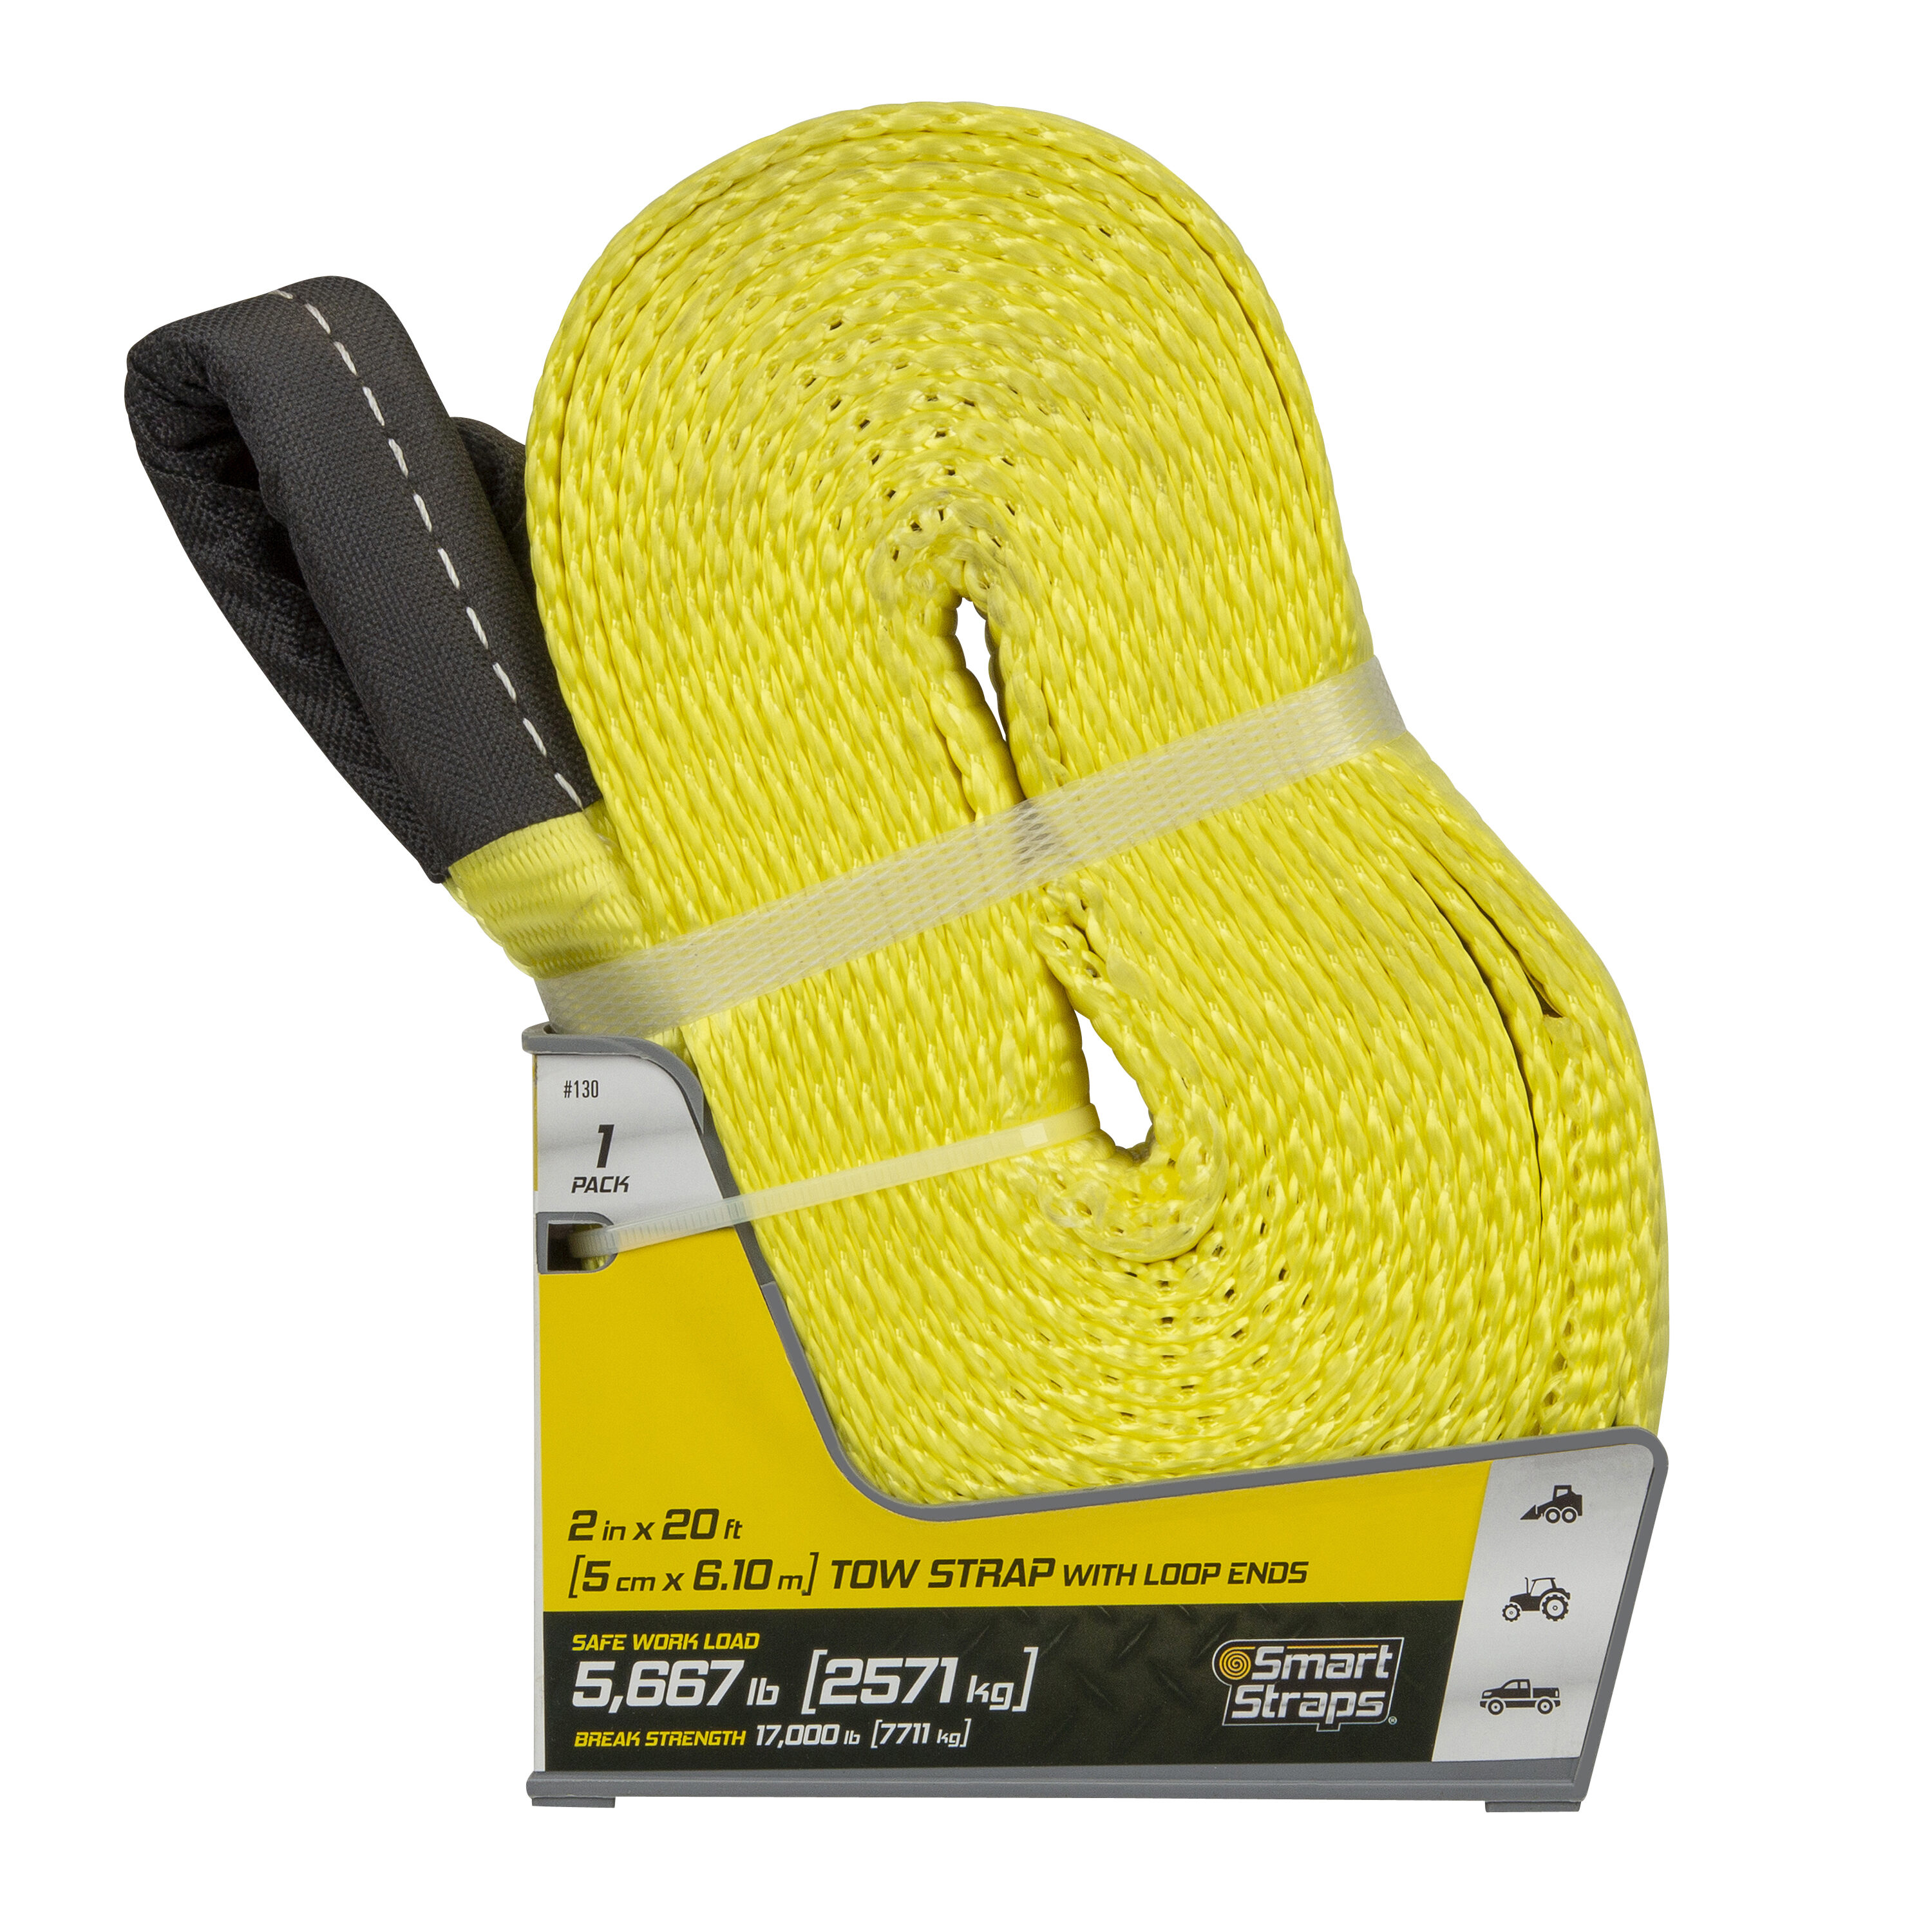 SmartStraps 2-in x 20-ft Tow Strap Tie Down 5666-lb at